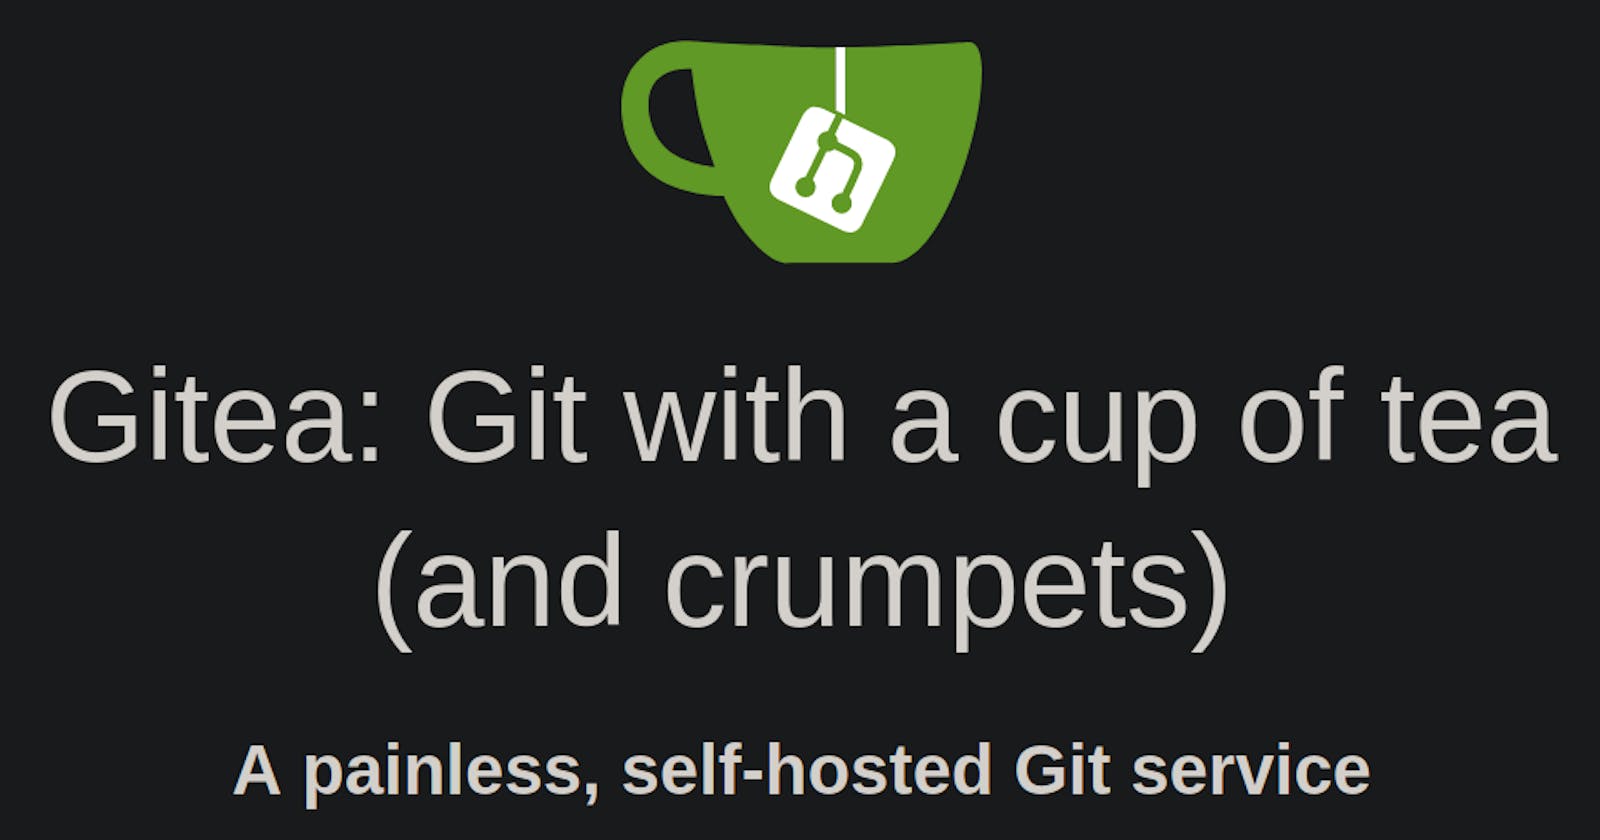 TryHackMe: Git and Crumpets